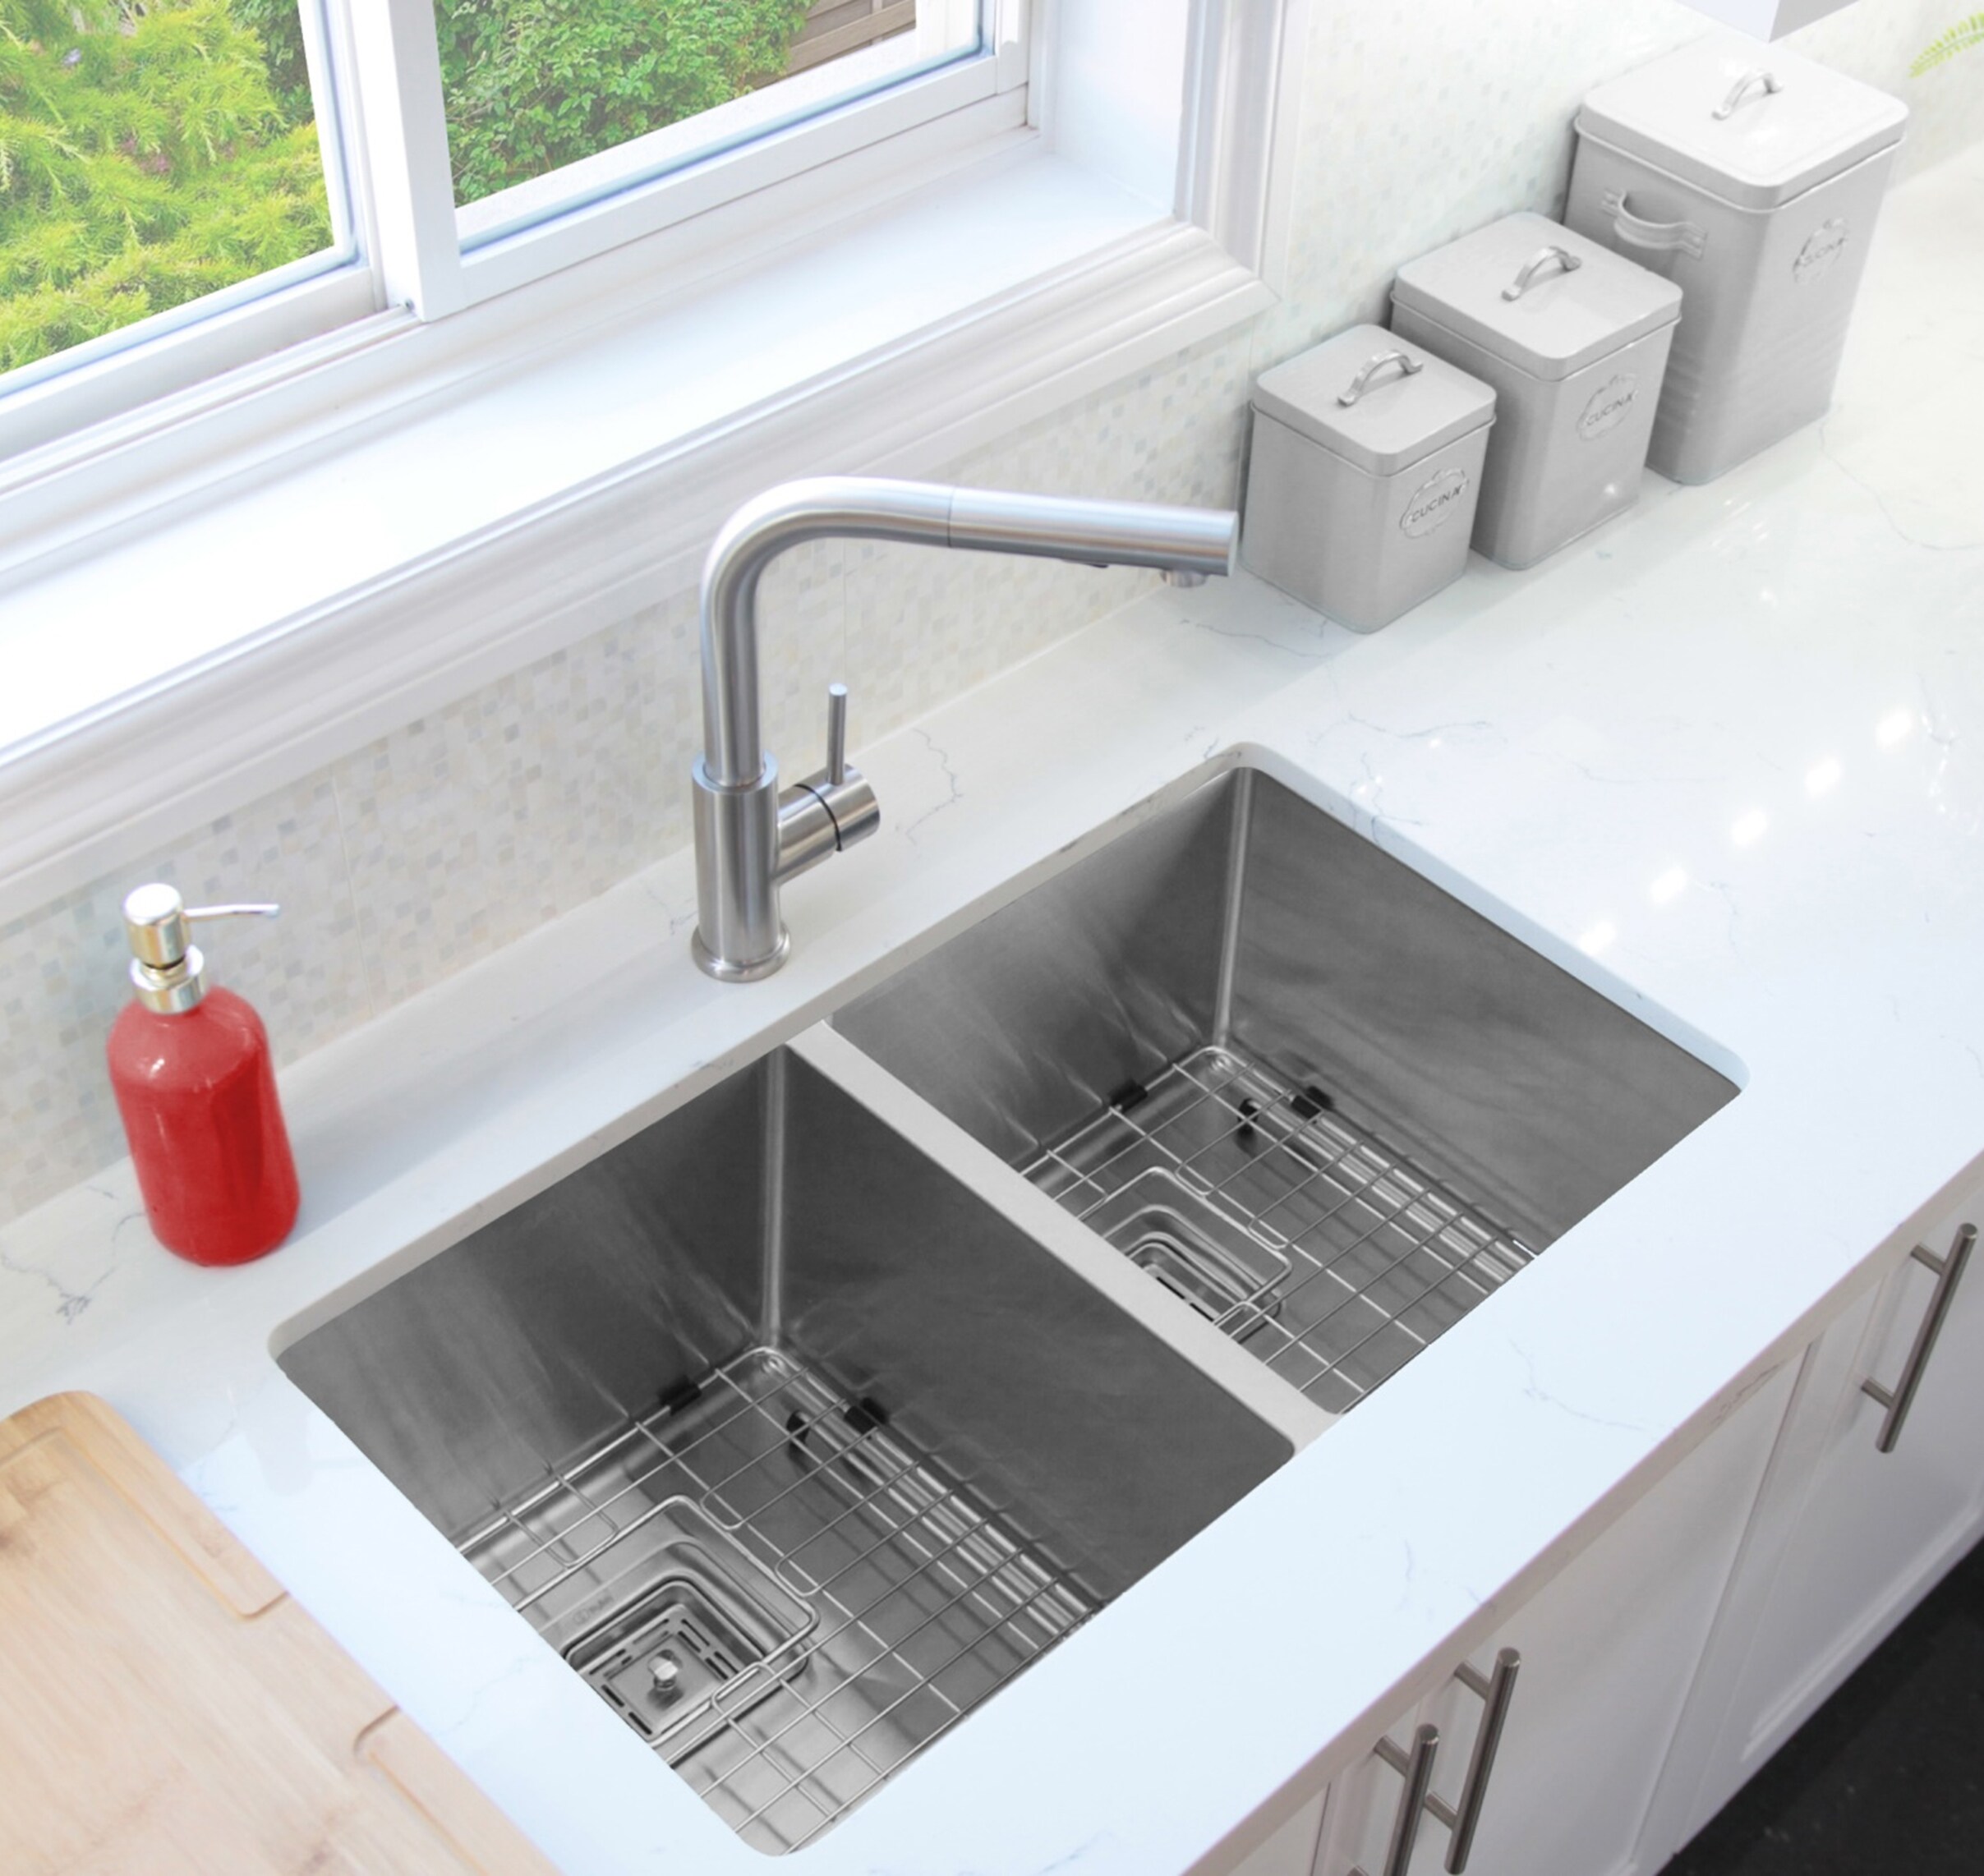 Modern 304 Stainless Steel Double Bowl Undermount Brushed Kitchen Sink Set  with Multifunctional Pull-Out Faucet Shot Gun Spayer